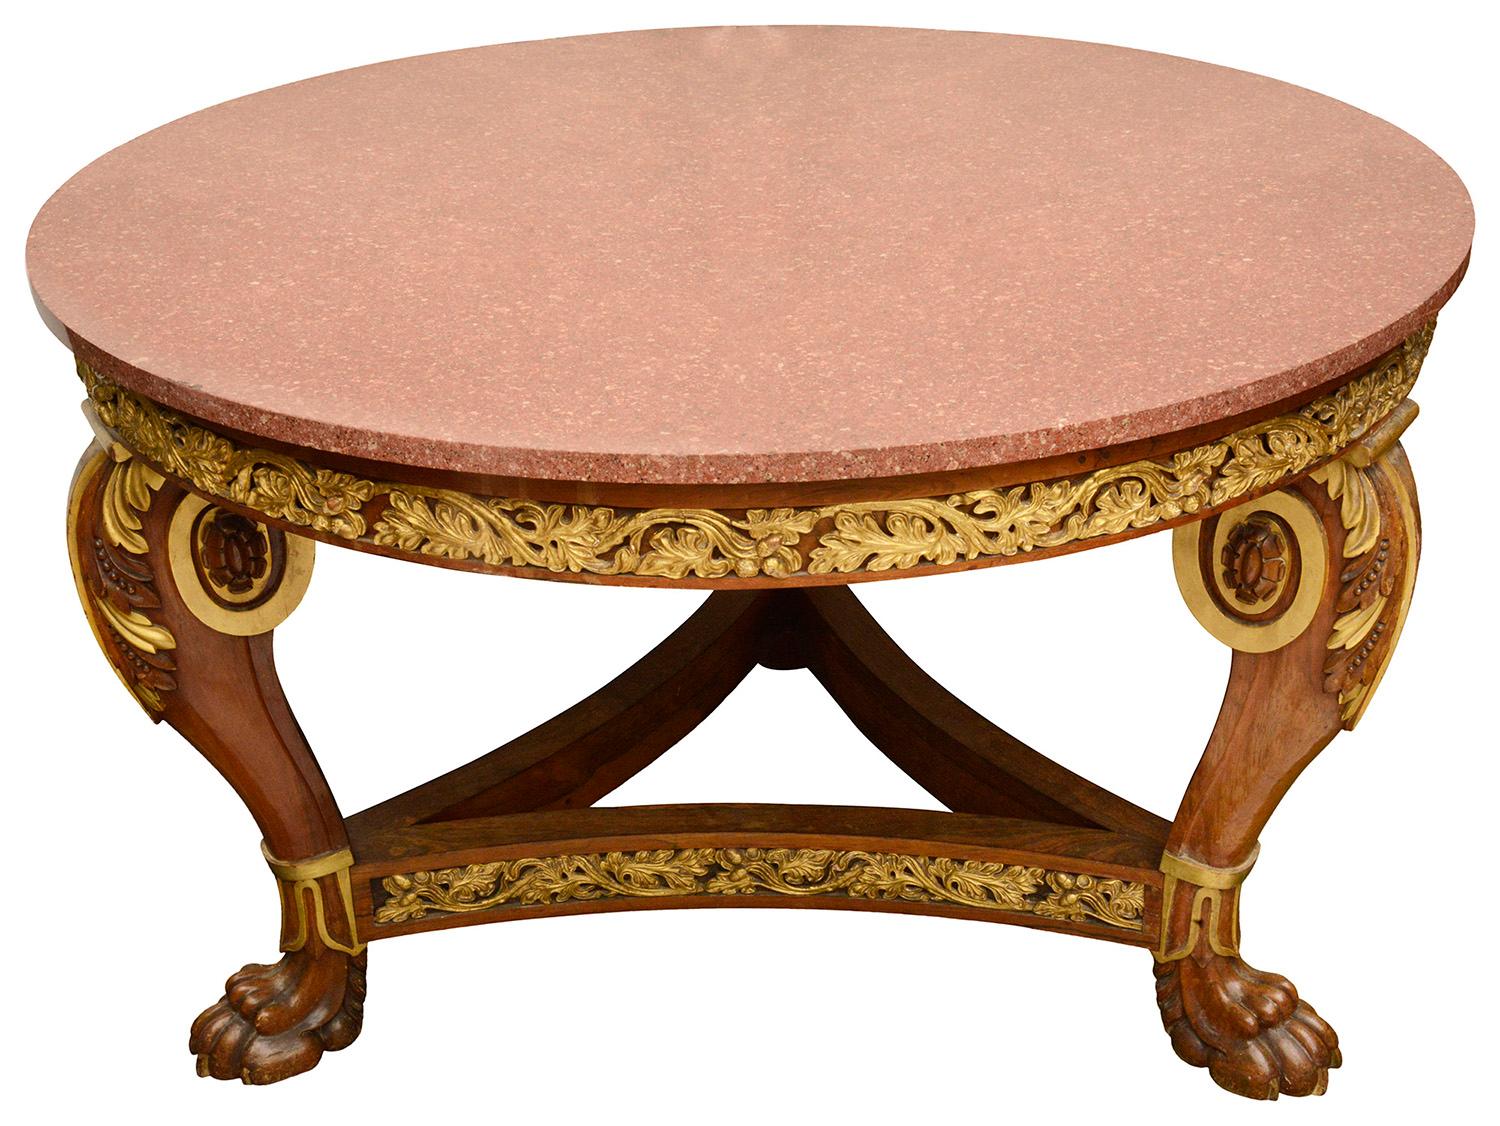 French 19th Century Empire Style Porphyry Marble Top Center Table In Good Condition For Sale In Brighton, Sussex